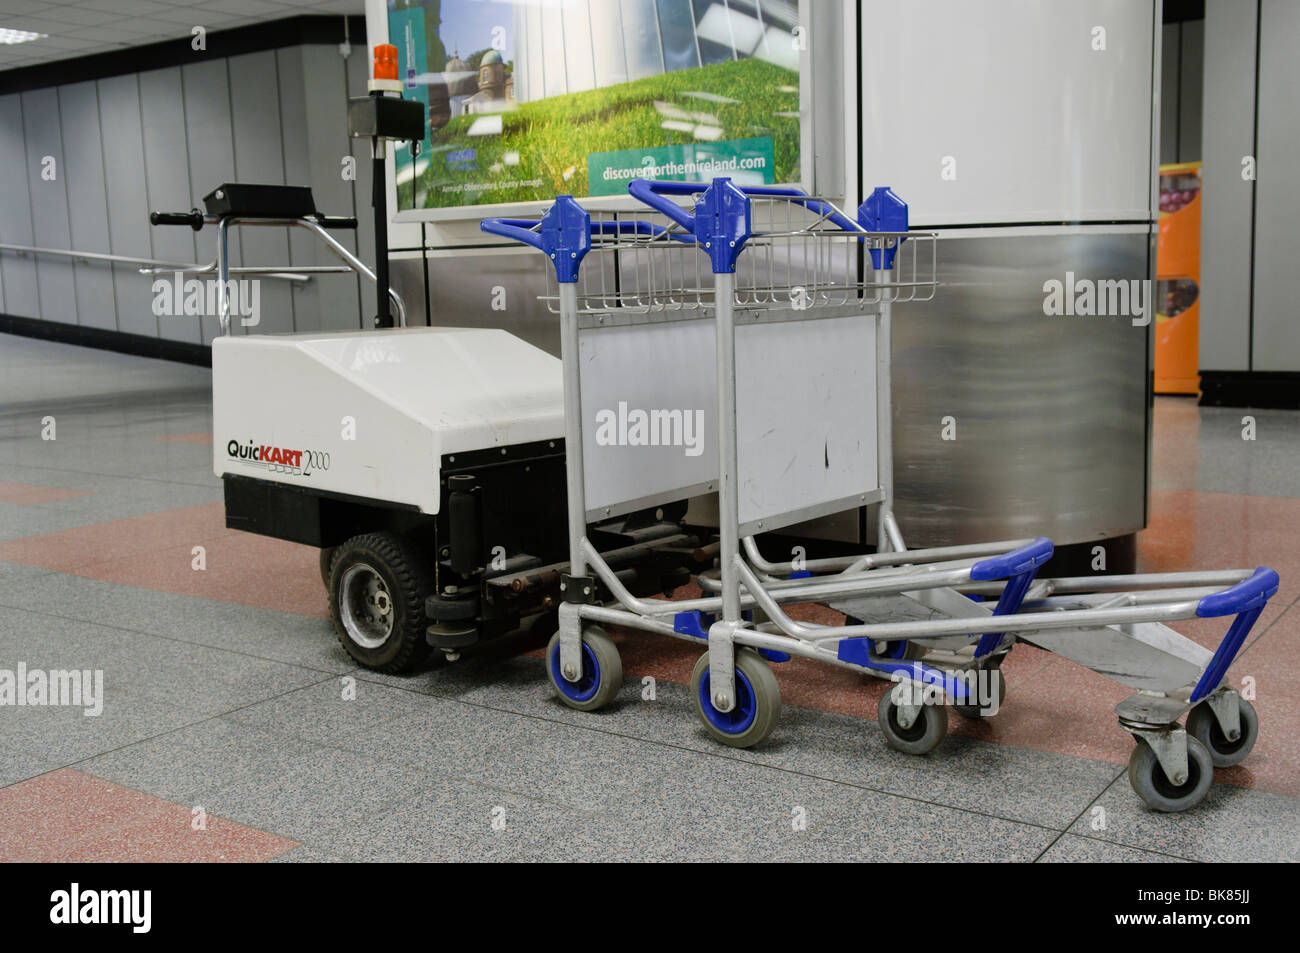 Small electric tractor unit for collecting and moving trolleys at an airport Stock Photo